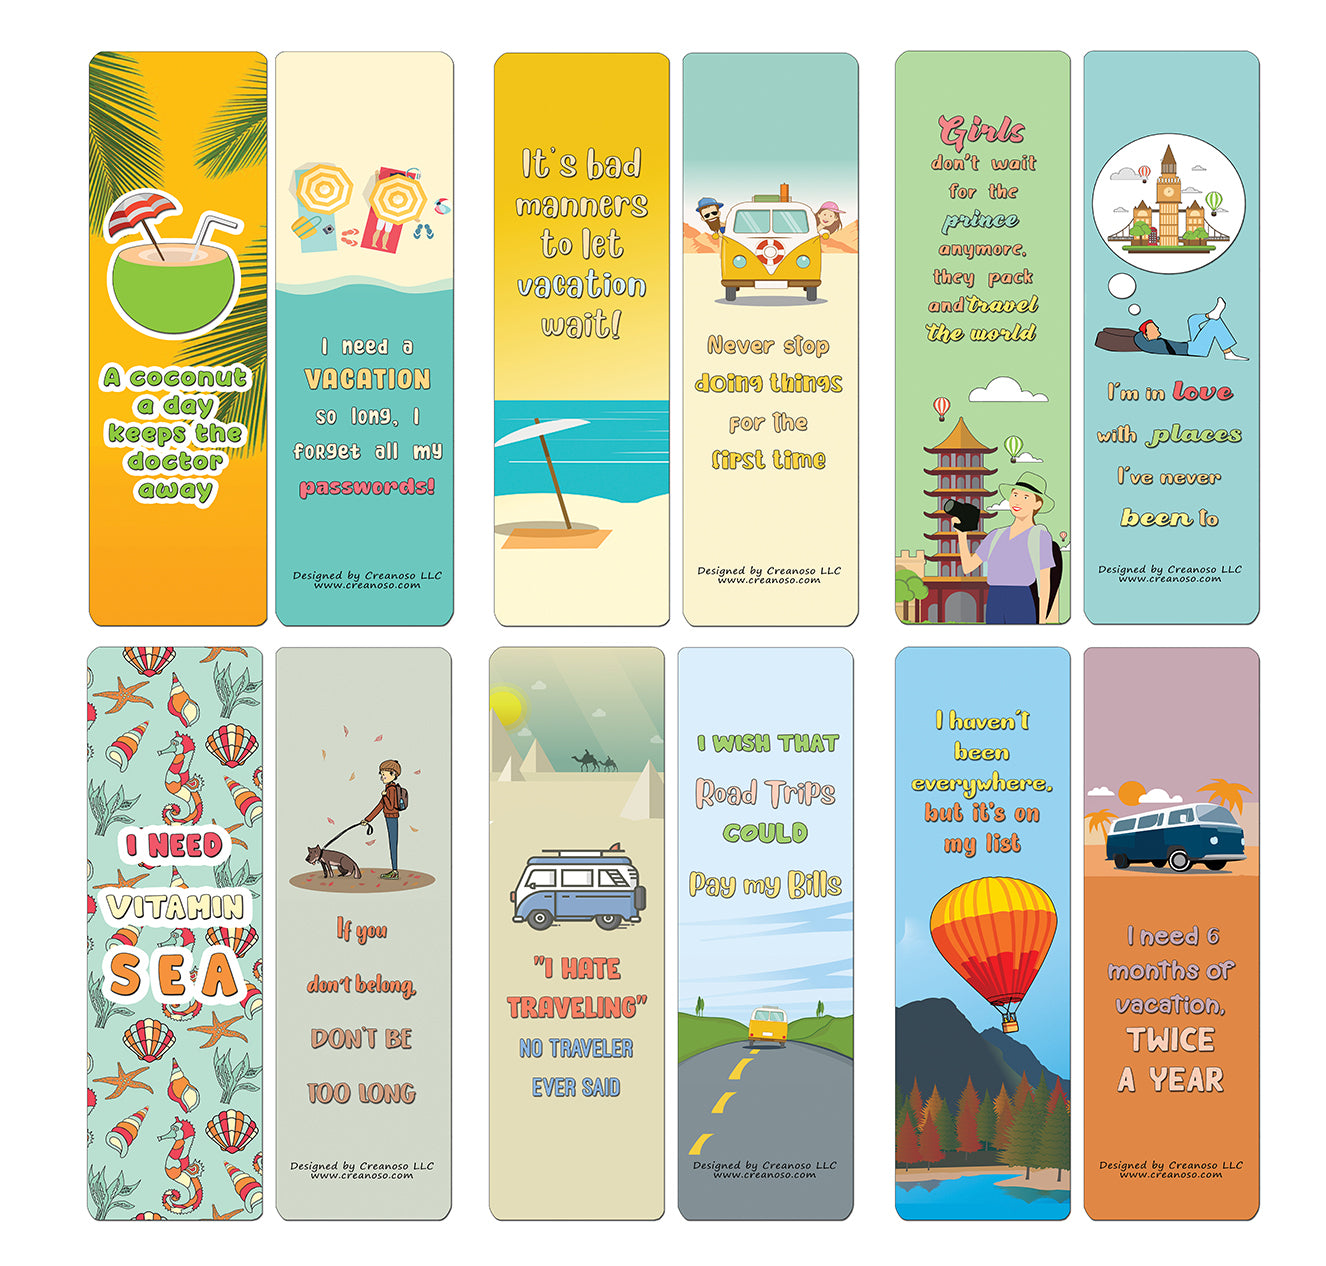 Creanoso Fun Travel Quotes Bookmarks (30-Pack) - Classroom Reward Incentives for Students and Children - Stocking Stuffers Party Favors & Giveaways for Teens & Adults